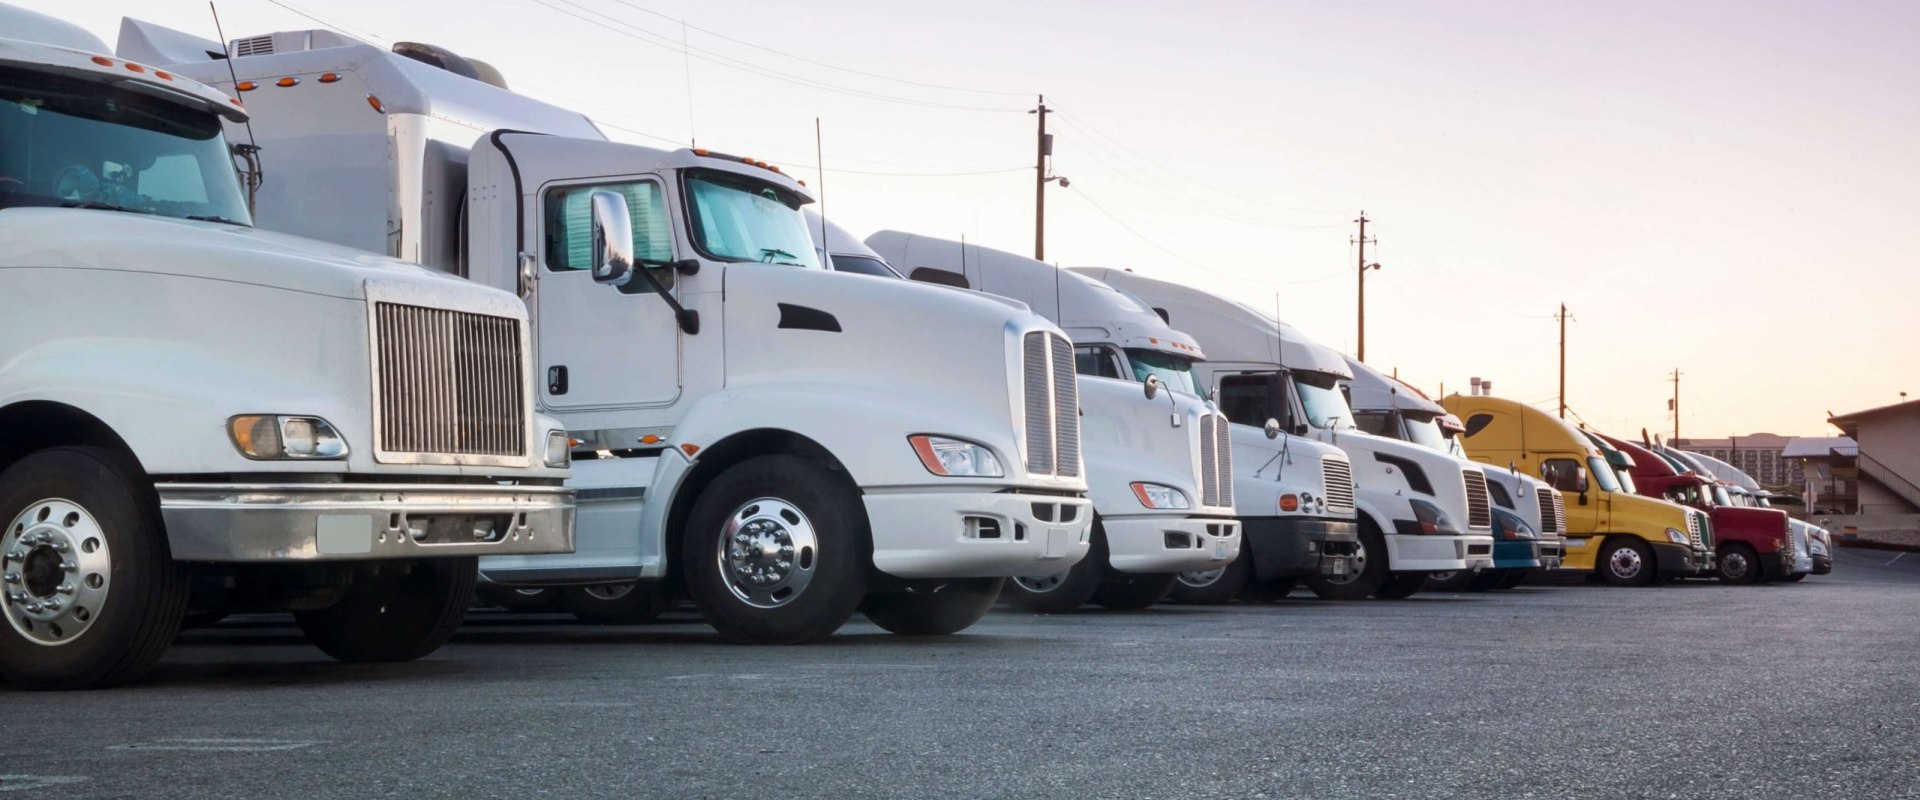 Types of Commercial Truck Tolls Explained